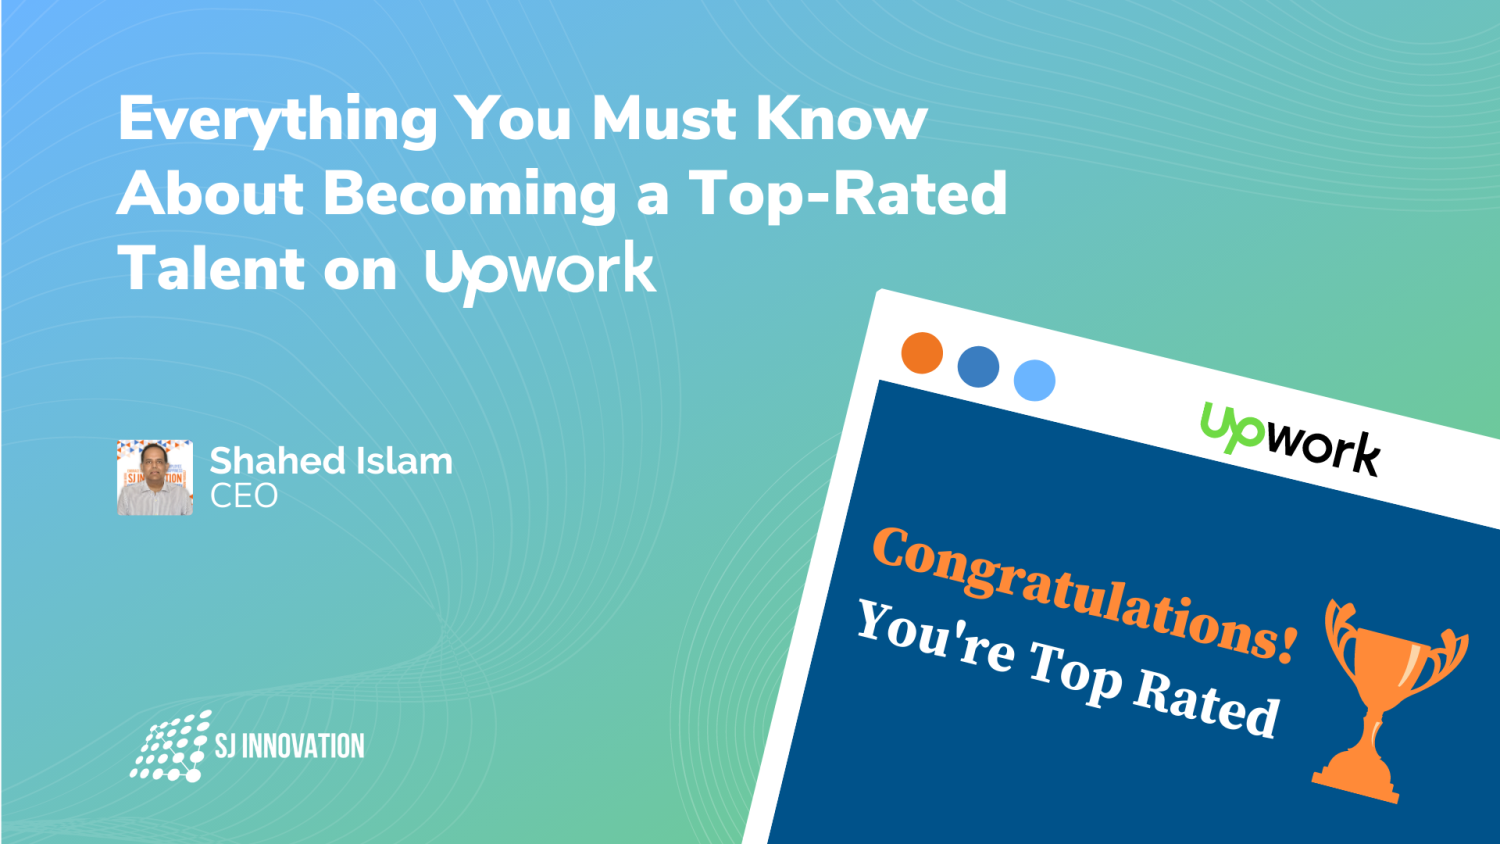 I just earned the new Top Rated Plus status on Upwork! Thanks be to God.